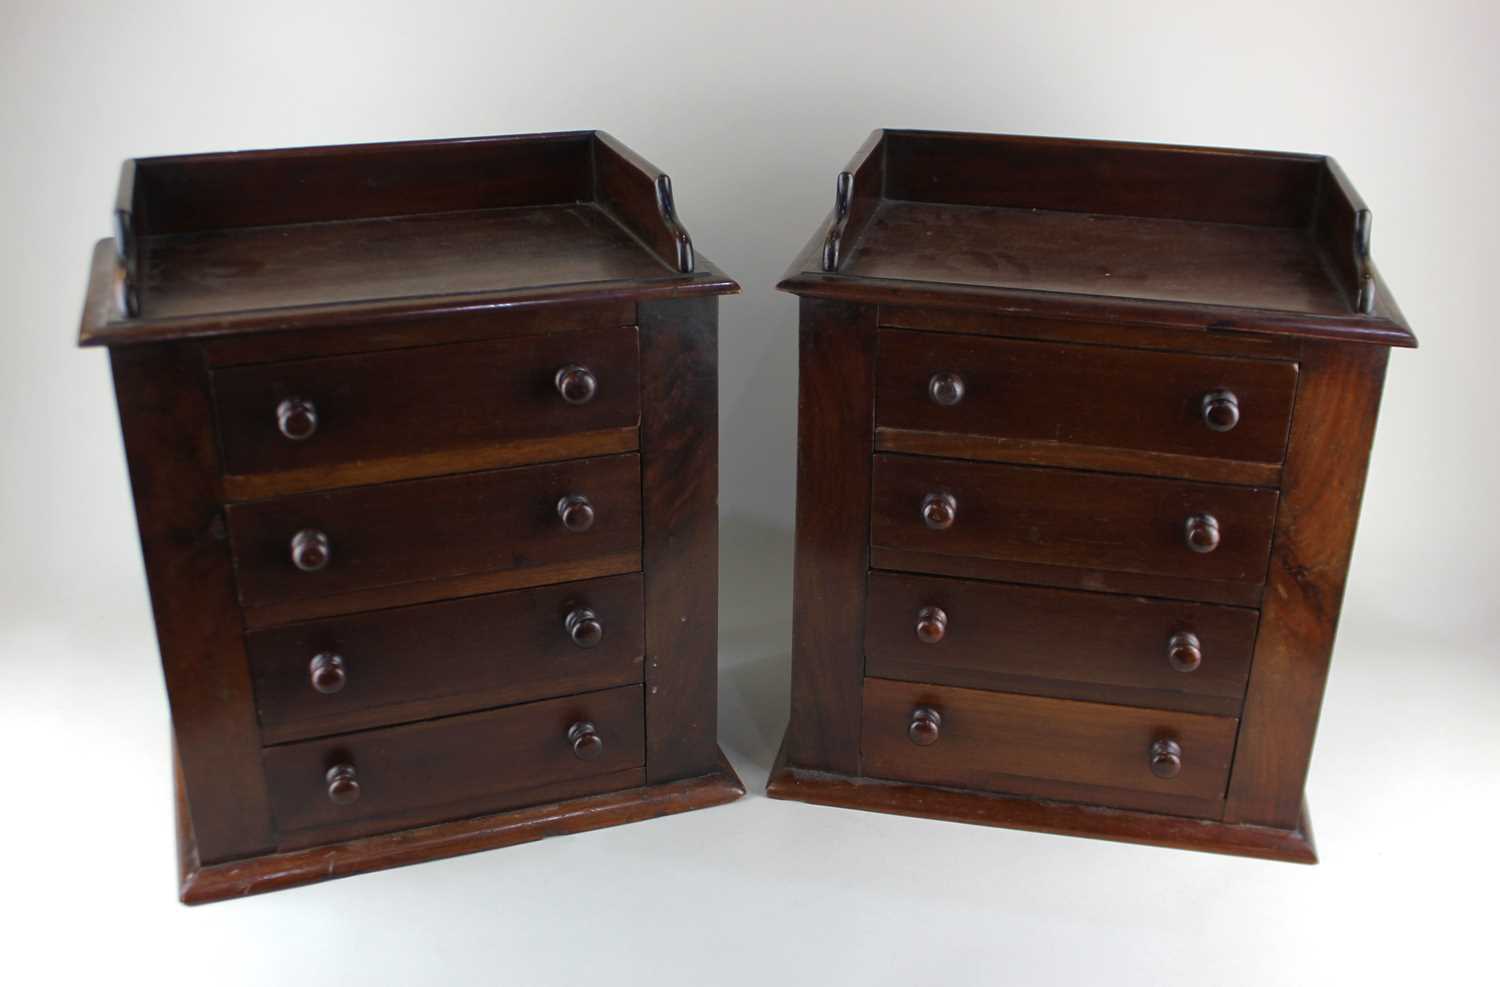 A pair of Victorian mahogany apprentice chests, each having a three-quarter gallery top above 4